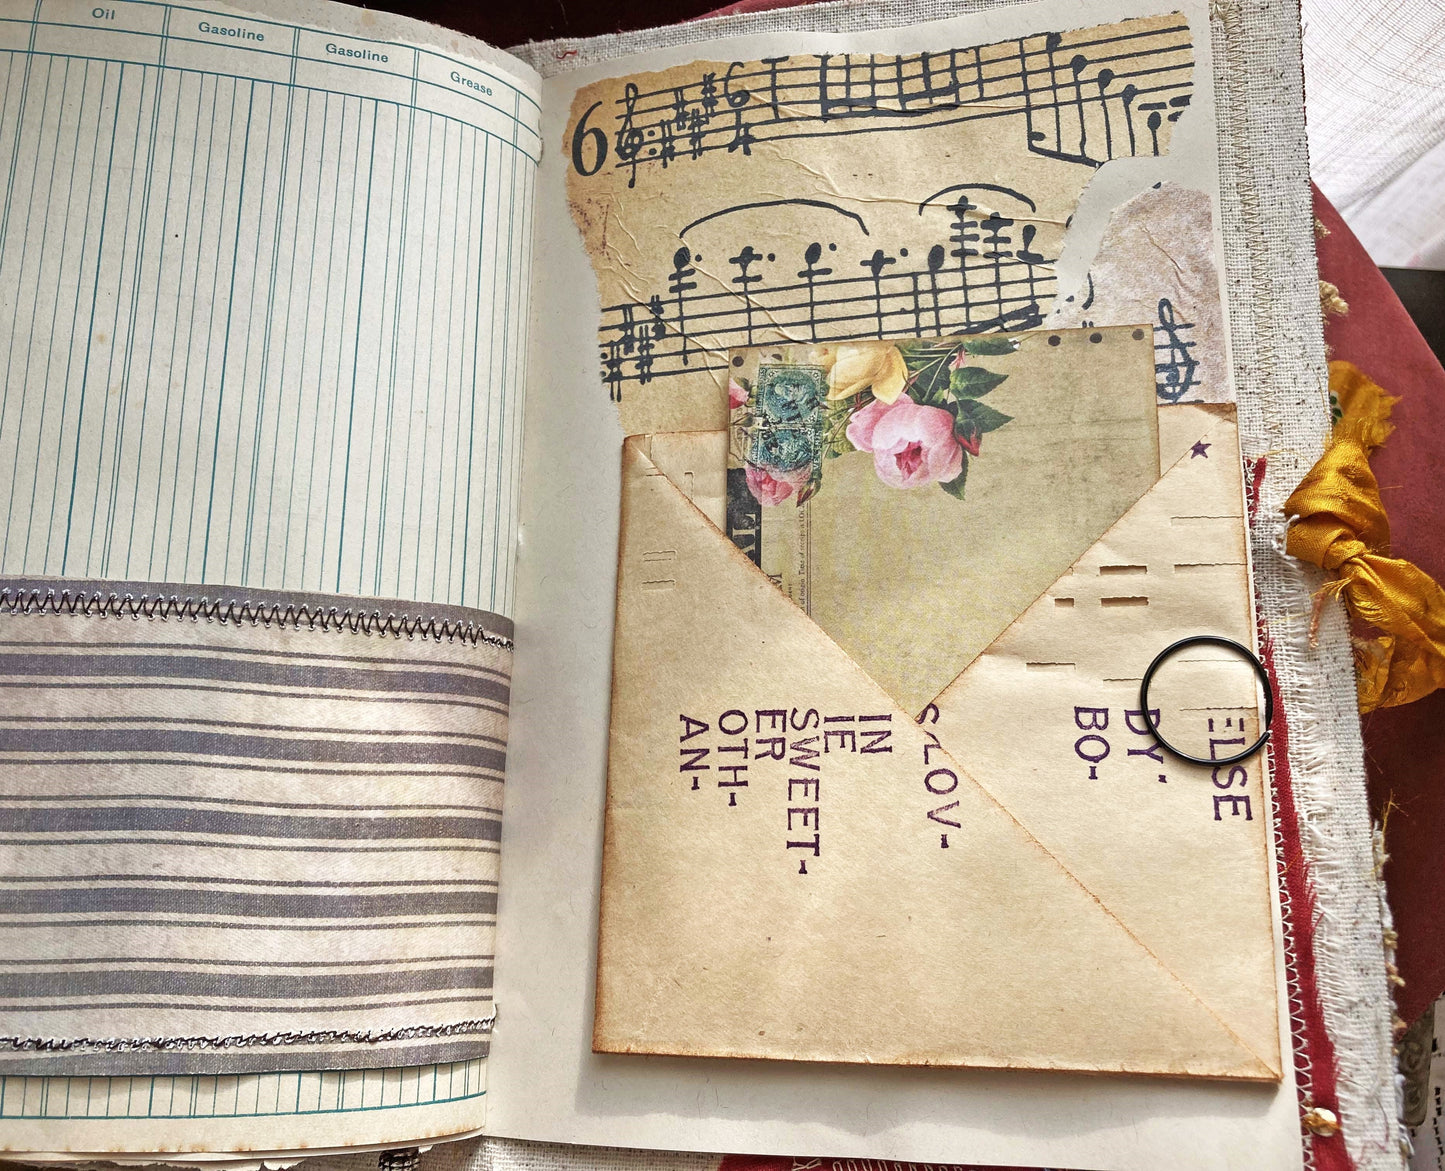 Carpetbagger Journal with Soft Upholstery Fabric Cover, Vintage Style Junk Journal, Room for Journaling and Photos